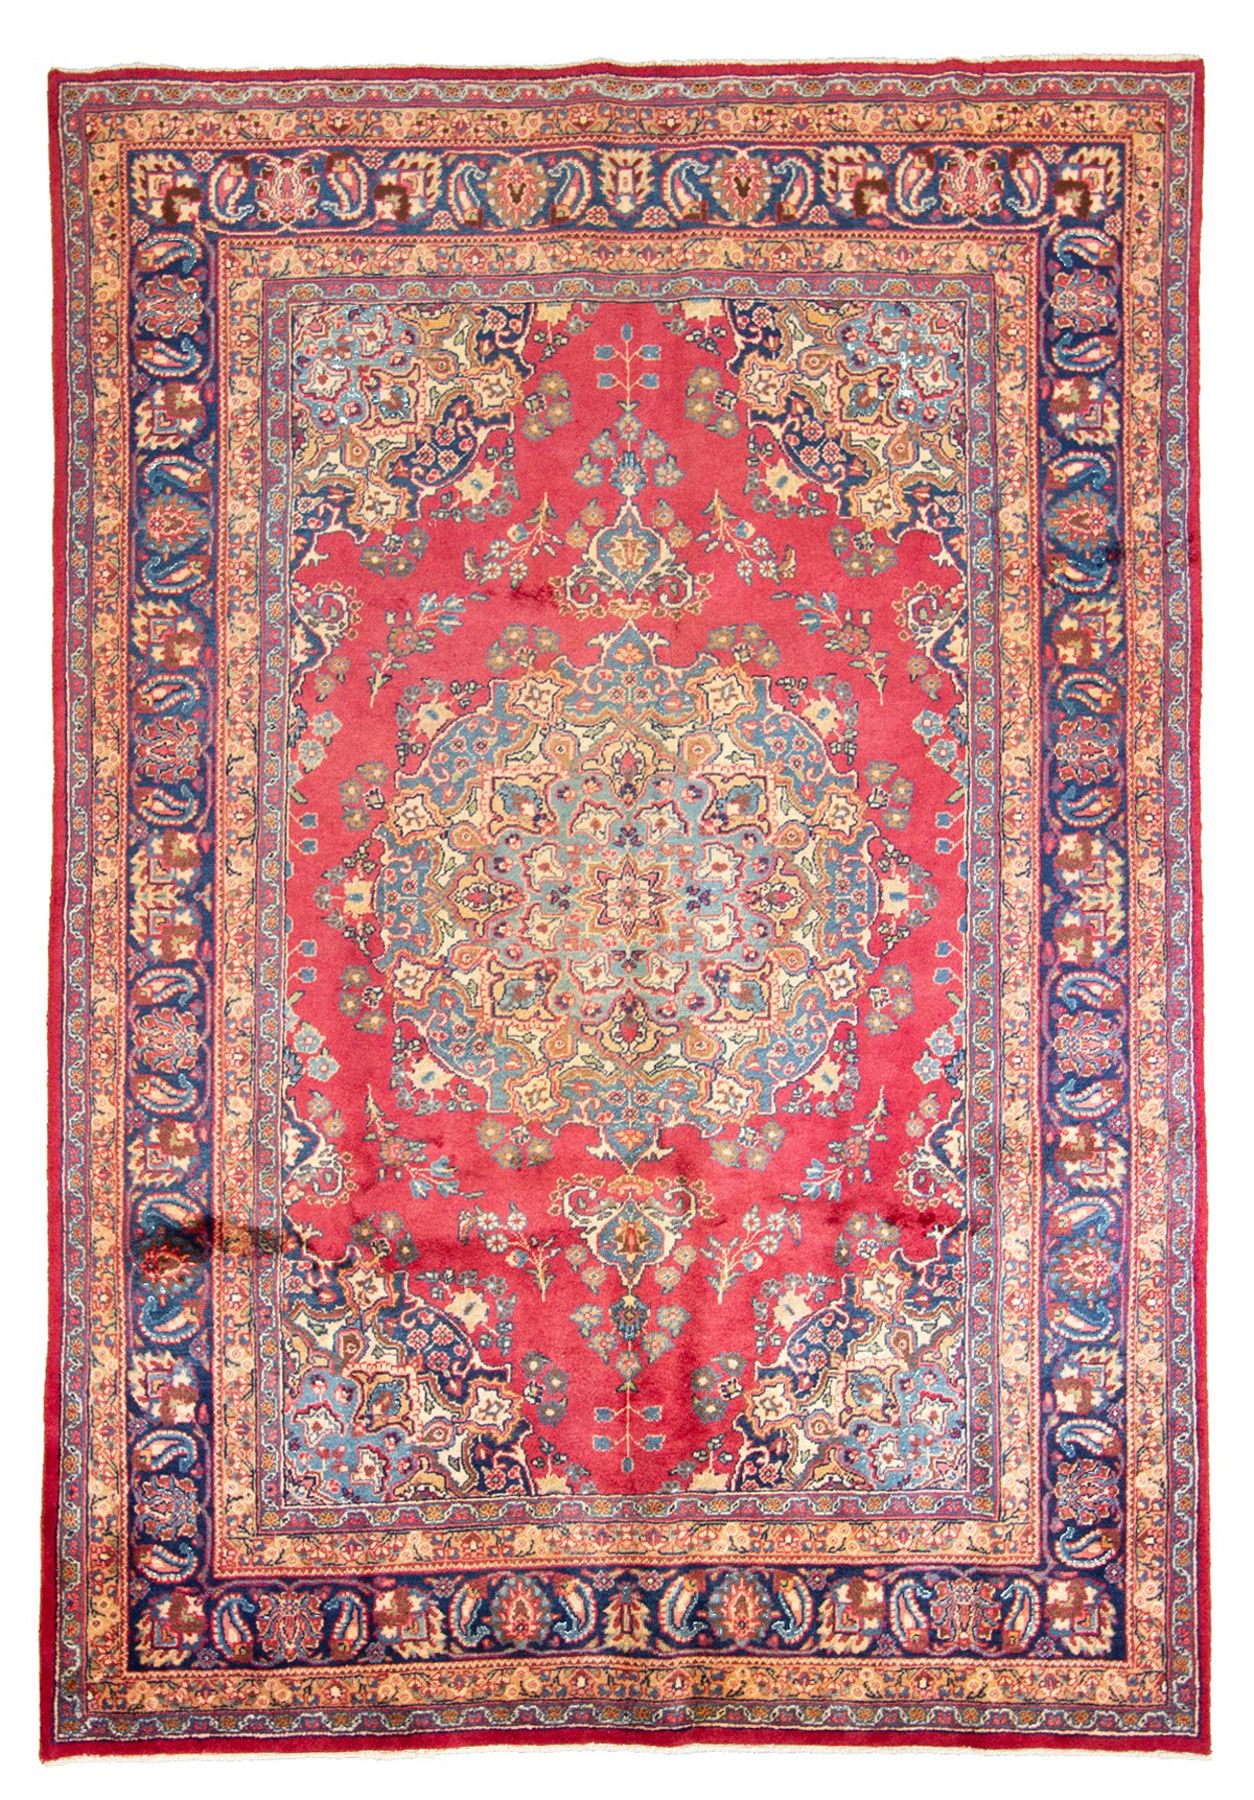 Hand-knotted Sabzevar  Wool Rug 6'6" x 9'7"  Size: 6'6" x 9'7"  